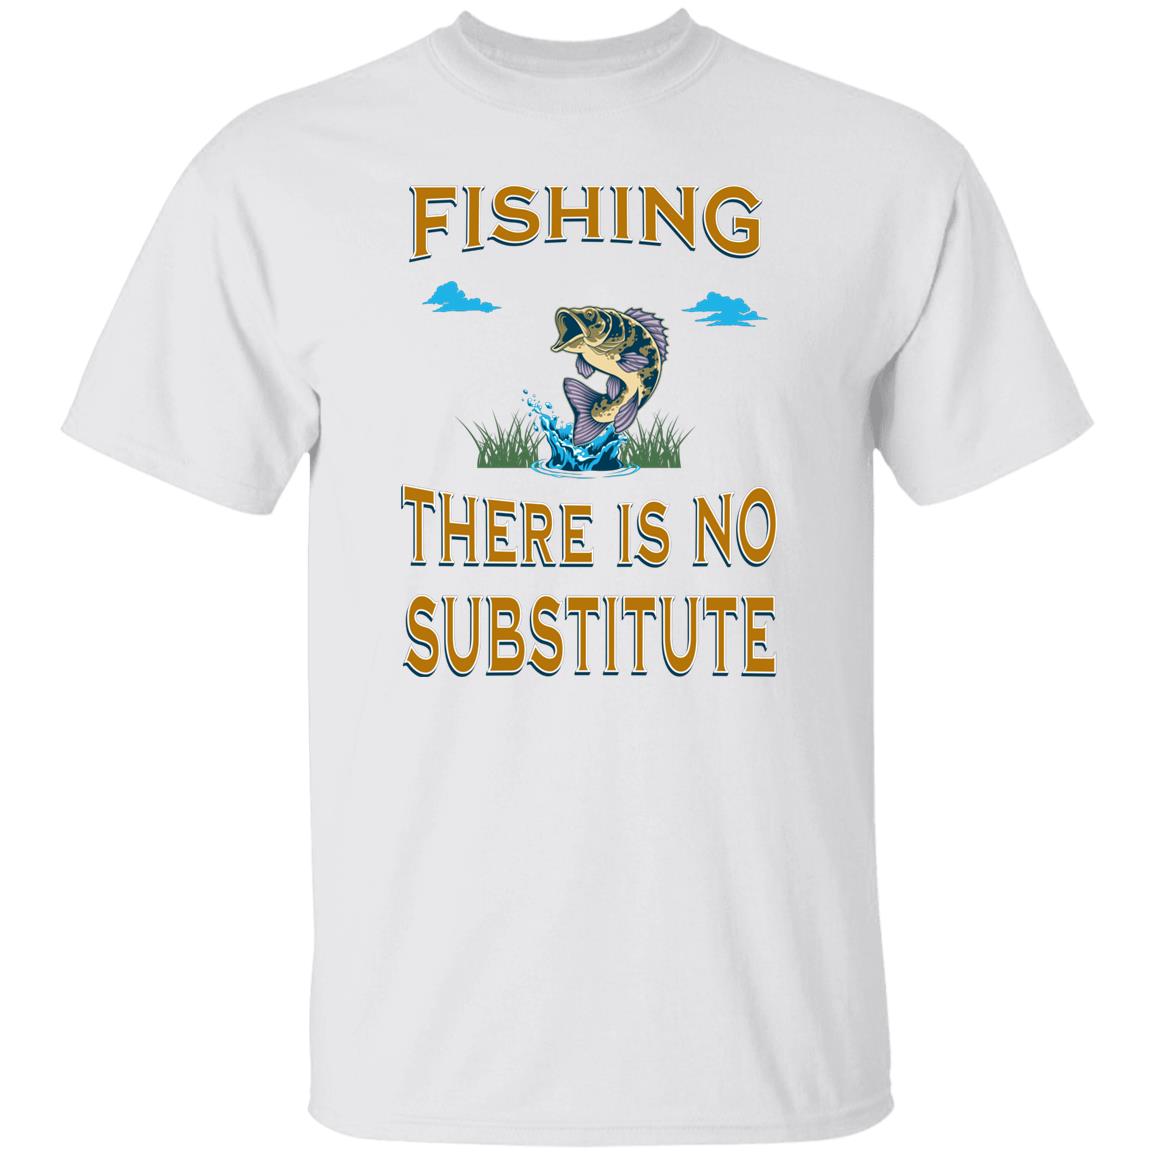 Fishing there is no substitute k t-shirt white